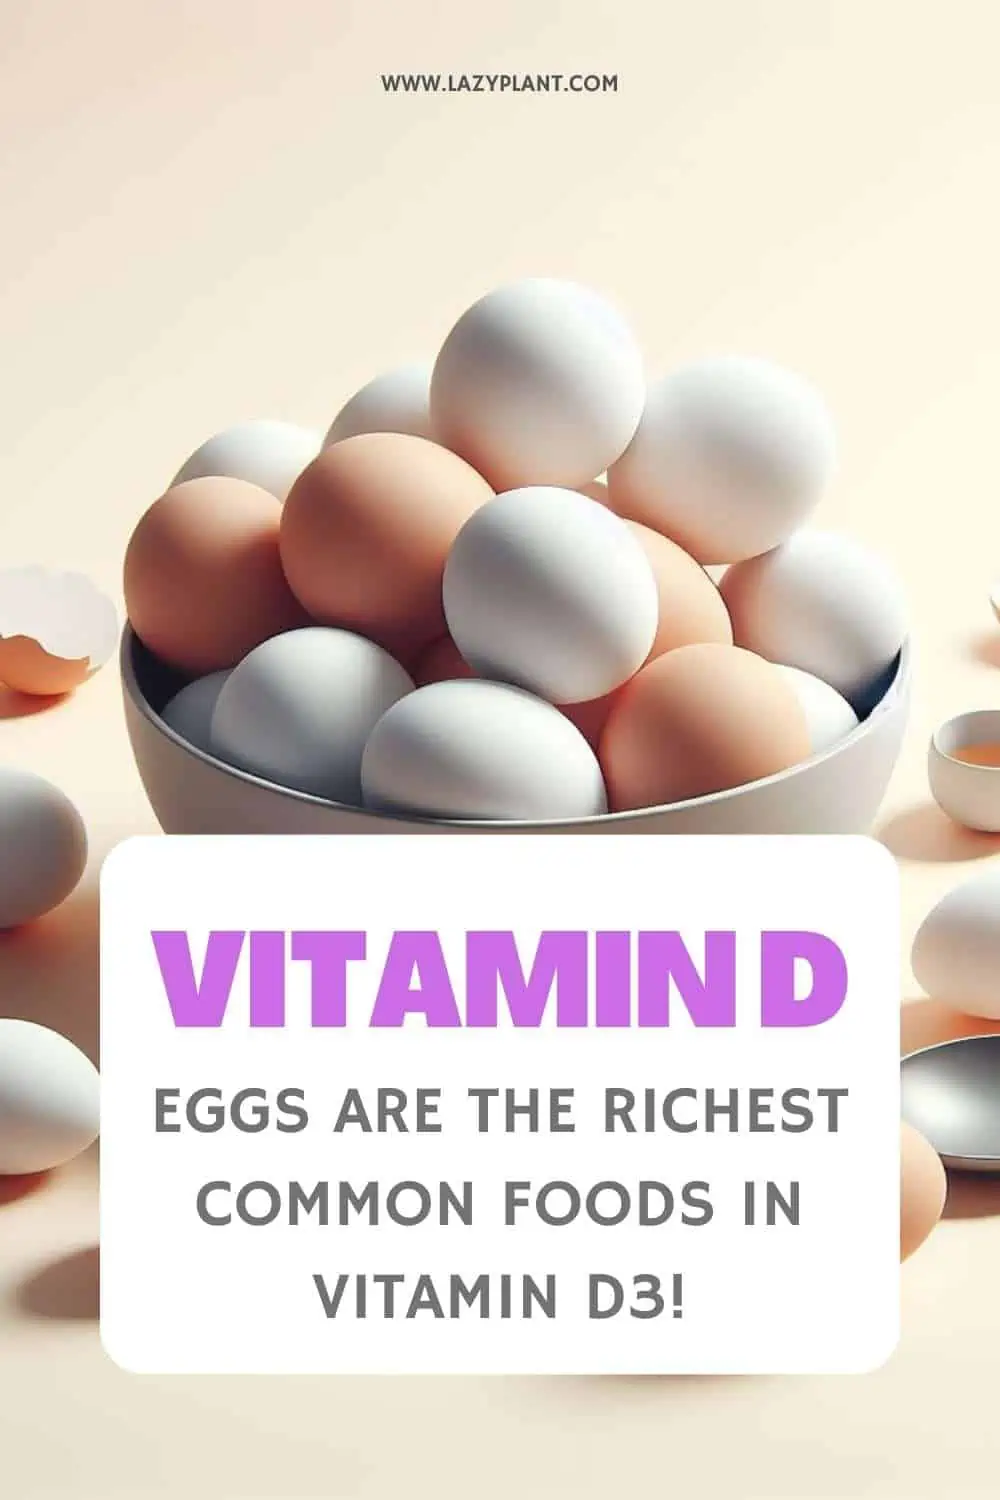 The richest common foods in vitamin D are Eggs.